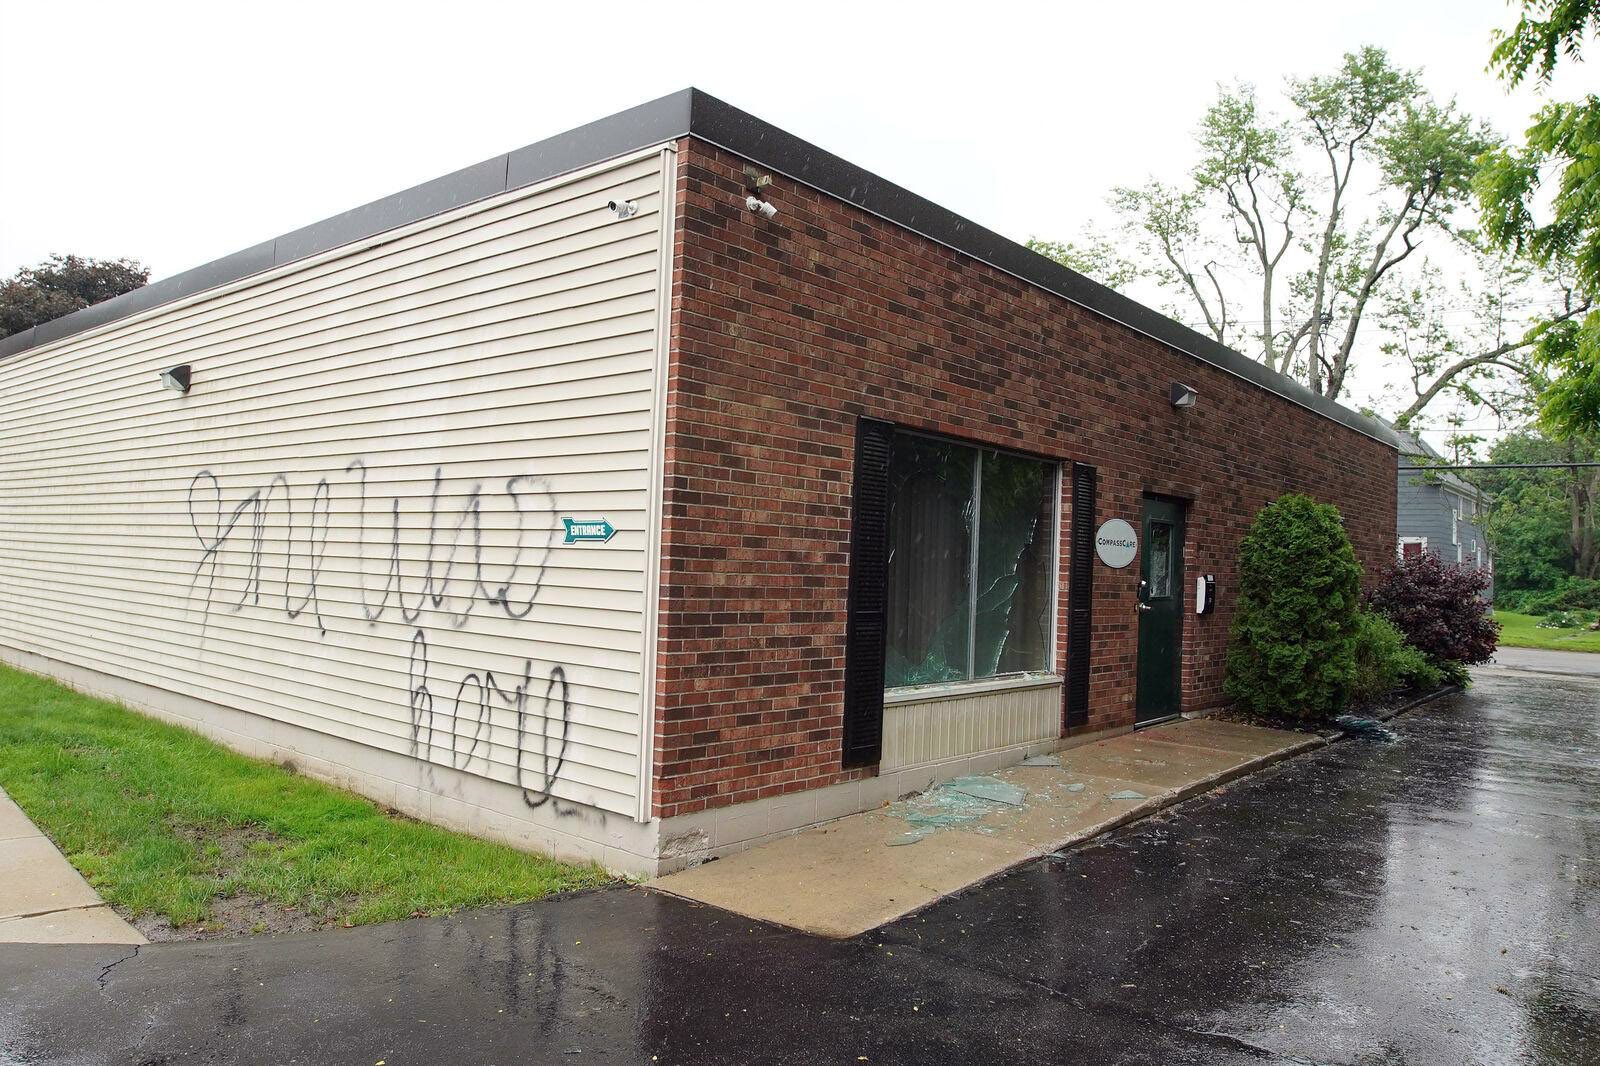 A wall is marked with graffiti reading "Jane was here" and broken glass covers the sidewalk after a suspected firebombing at CompassCare, a crisis pregnancy center in Eggertsville, near Buffalo, New York, on Tuesday, June 7, 2022. (Mark Mulville/Buffalo News via AP)